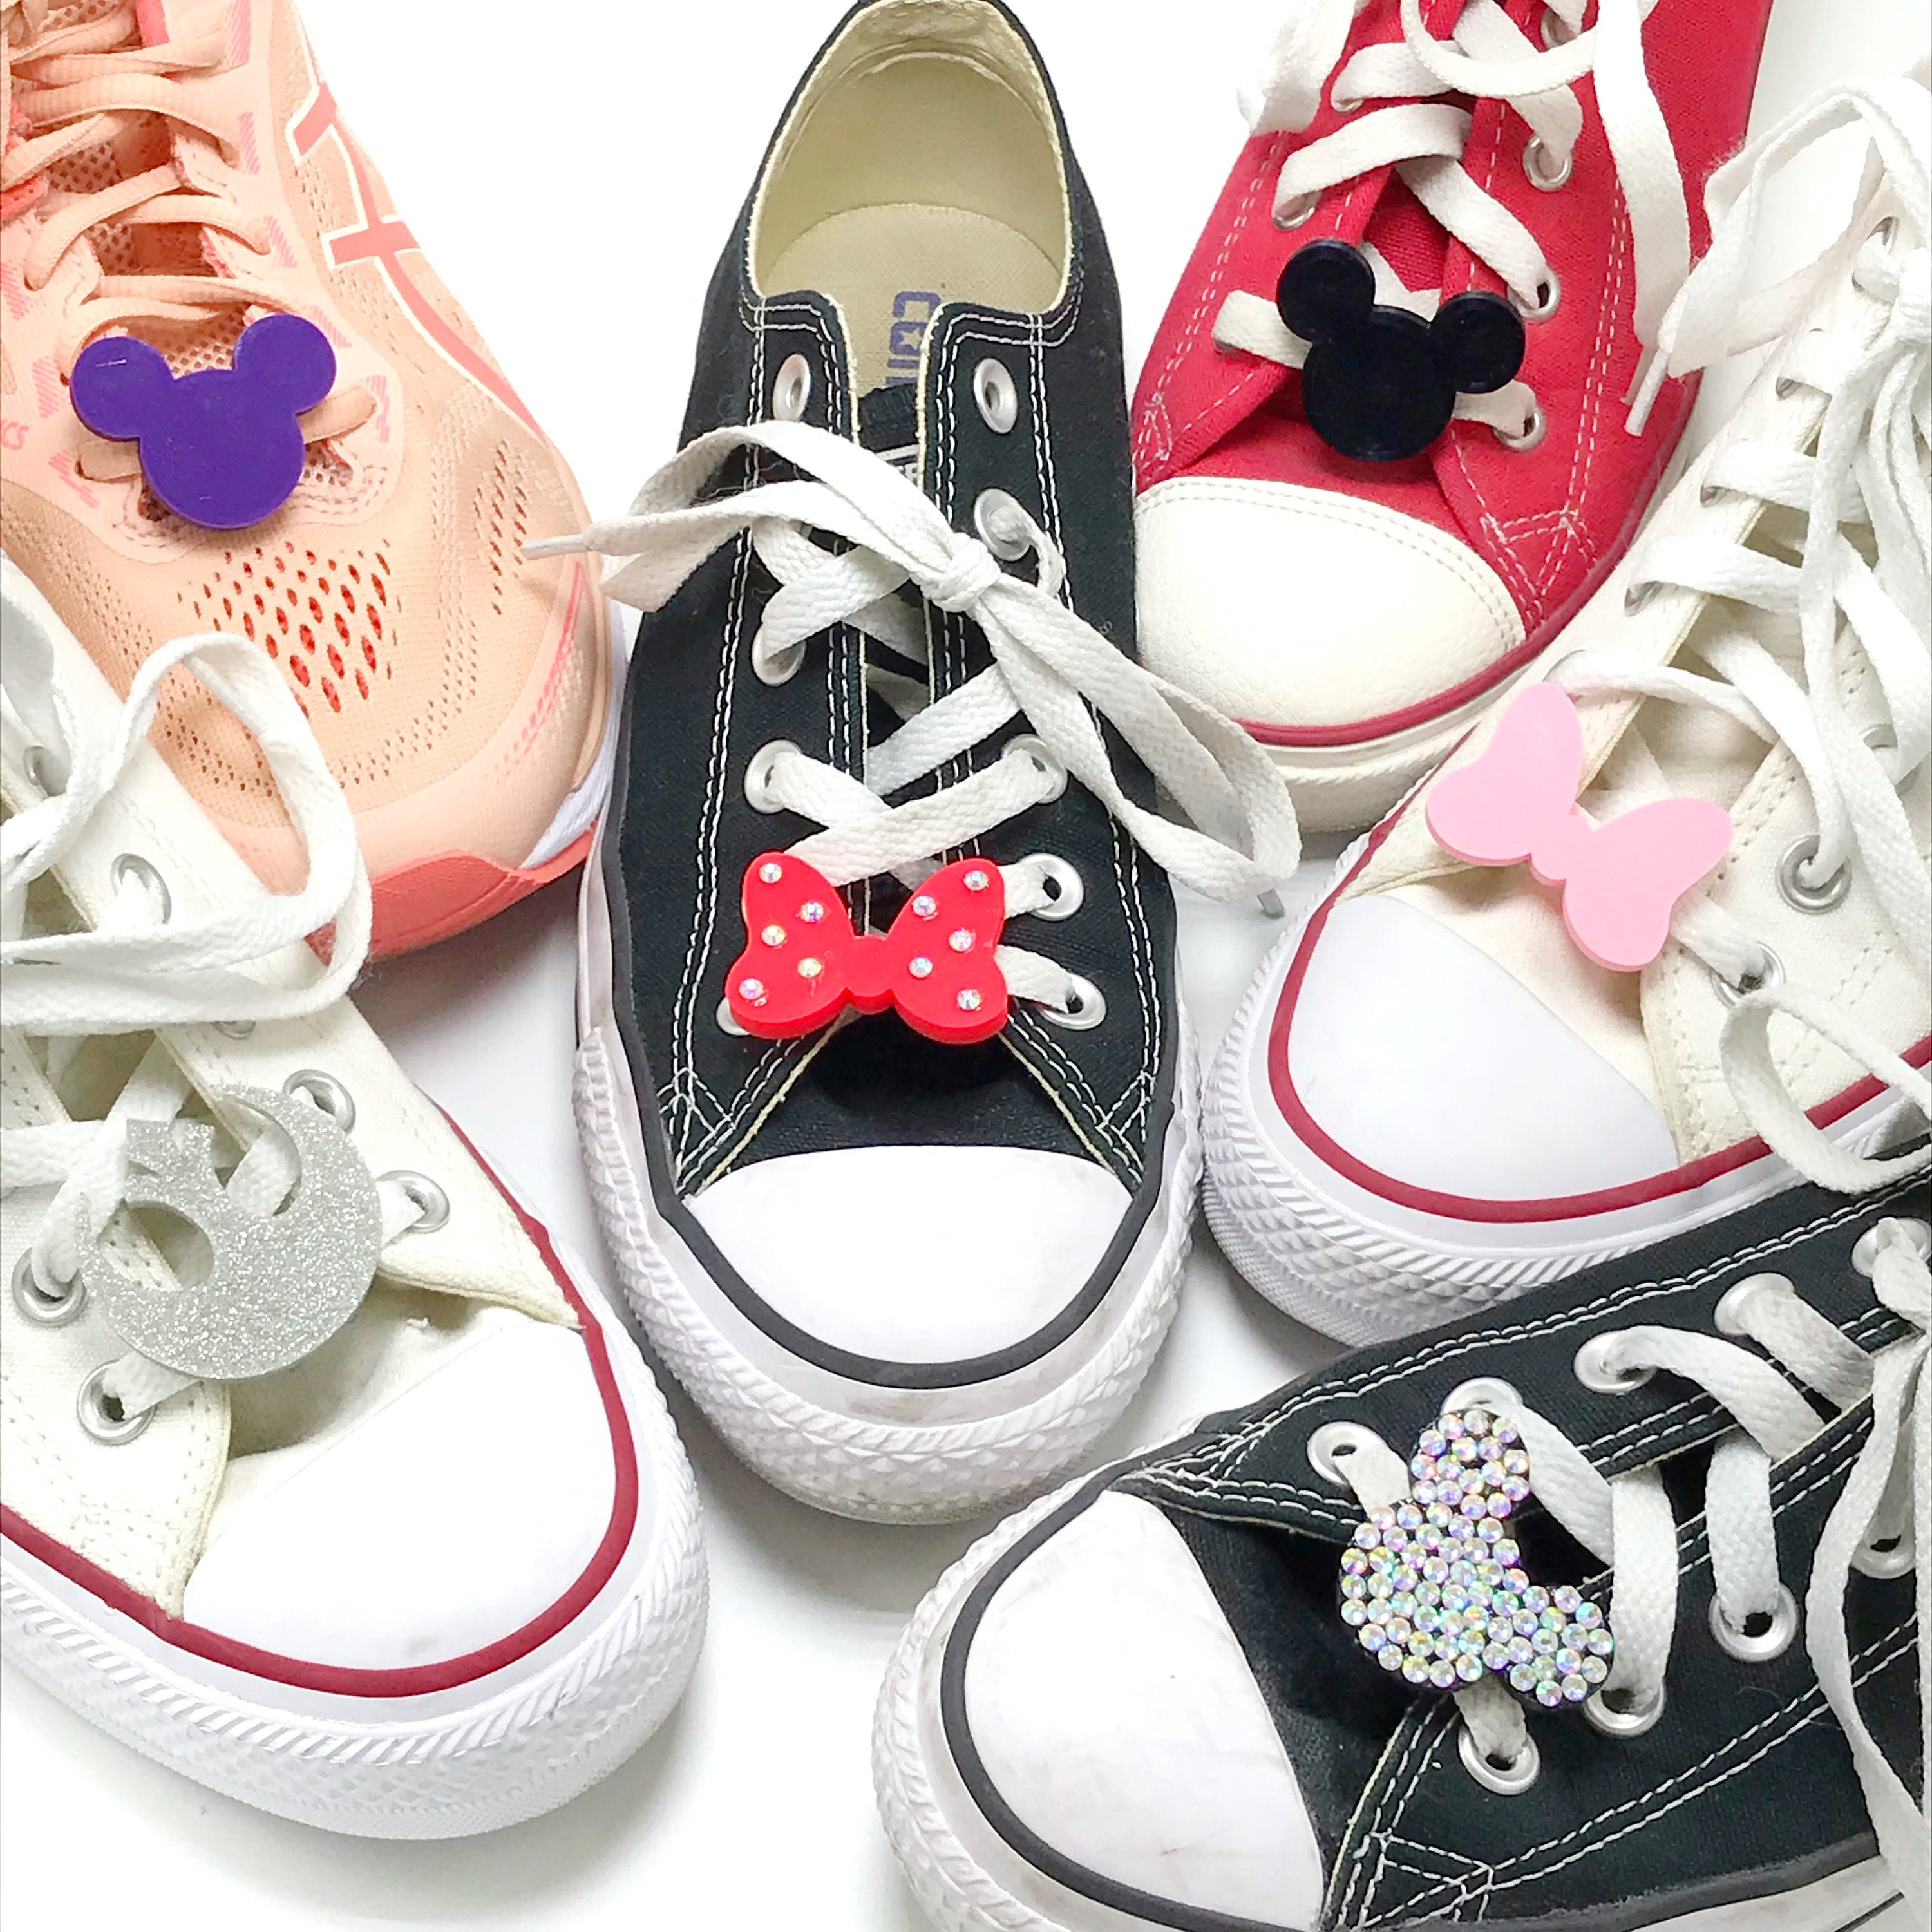 Pin on Shoes♡Shoes